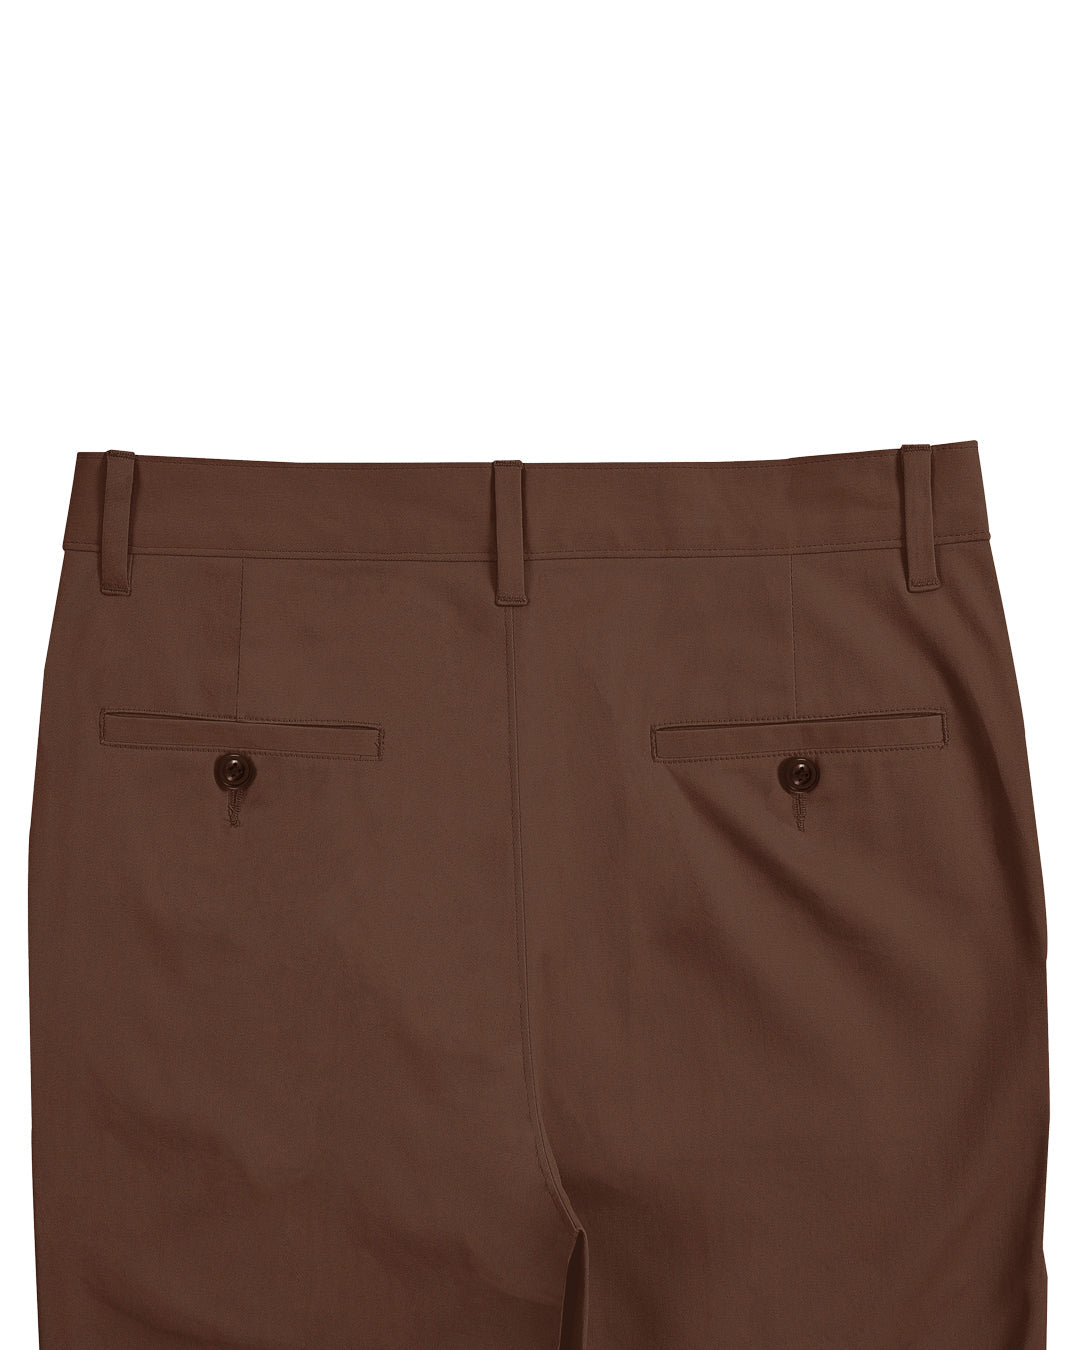 Back view of custom Genoa Chino pants for men by Luxire in chestnut brown